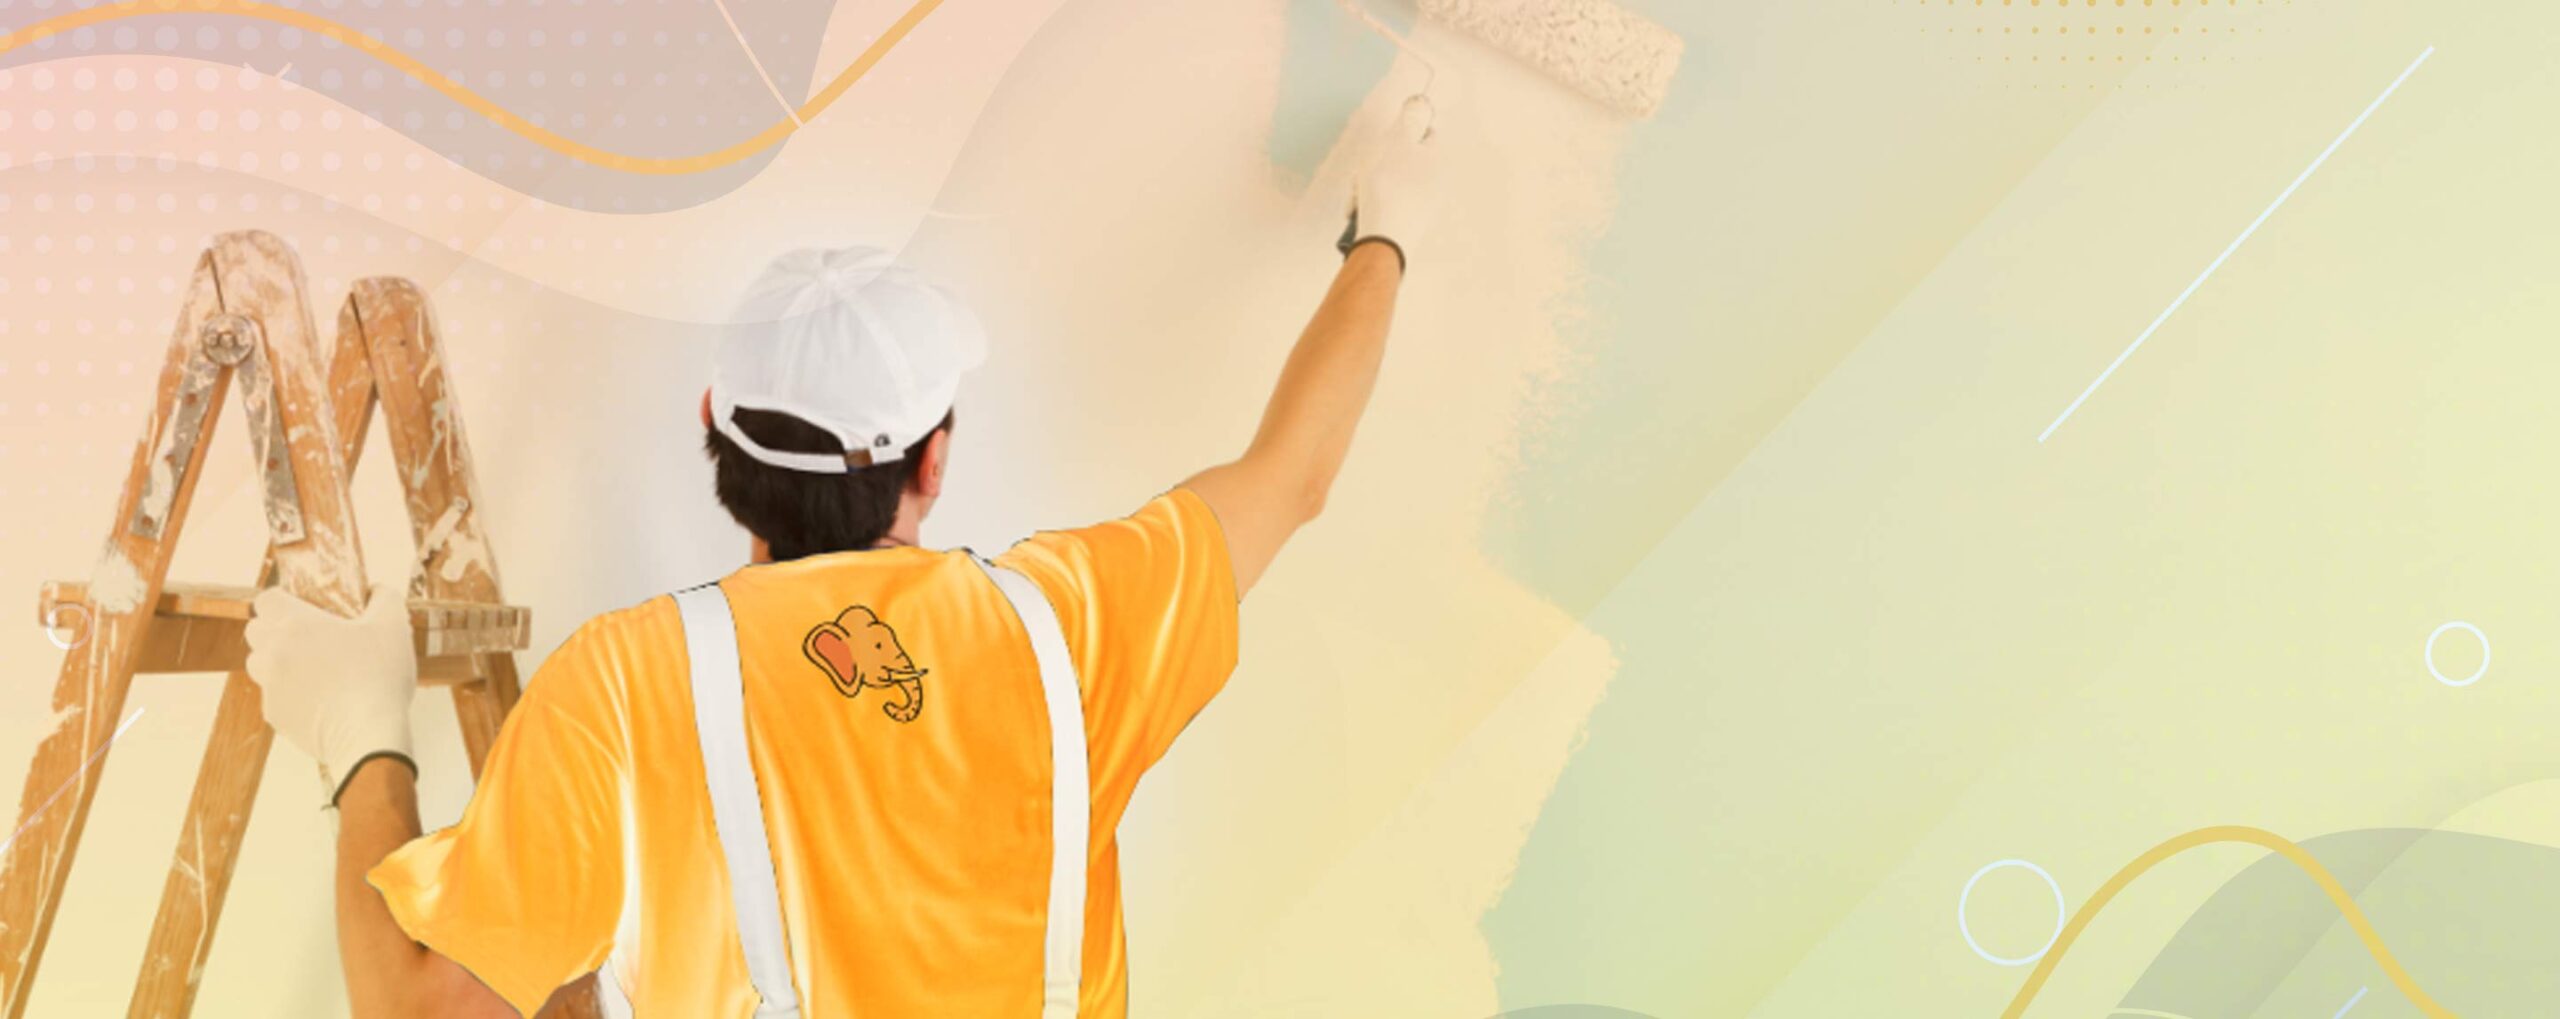 Transform Your Home With A Fresh Coat Of Paint